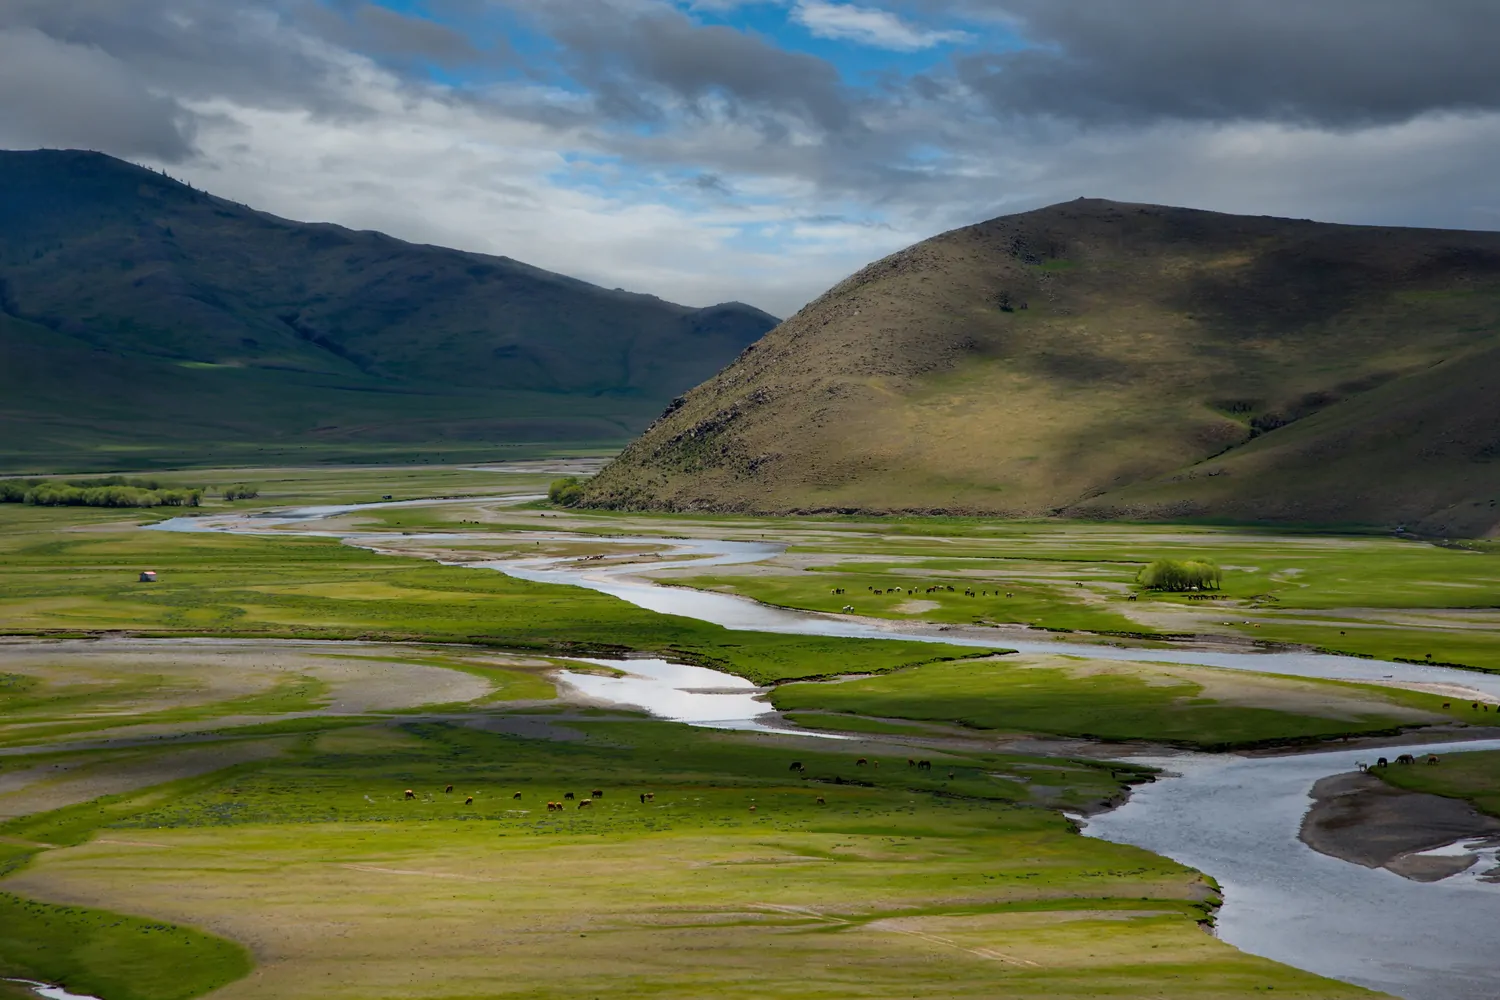 the UNESCO world heritage site Orkhon river valley